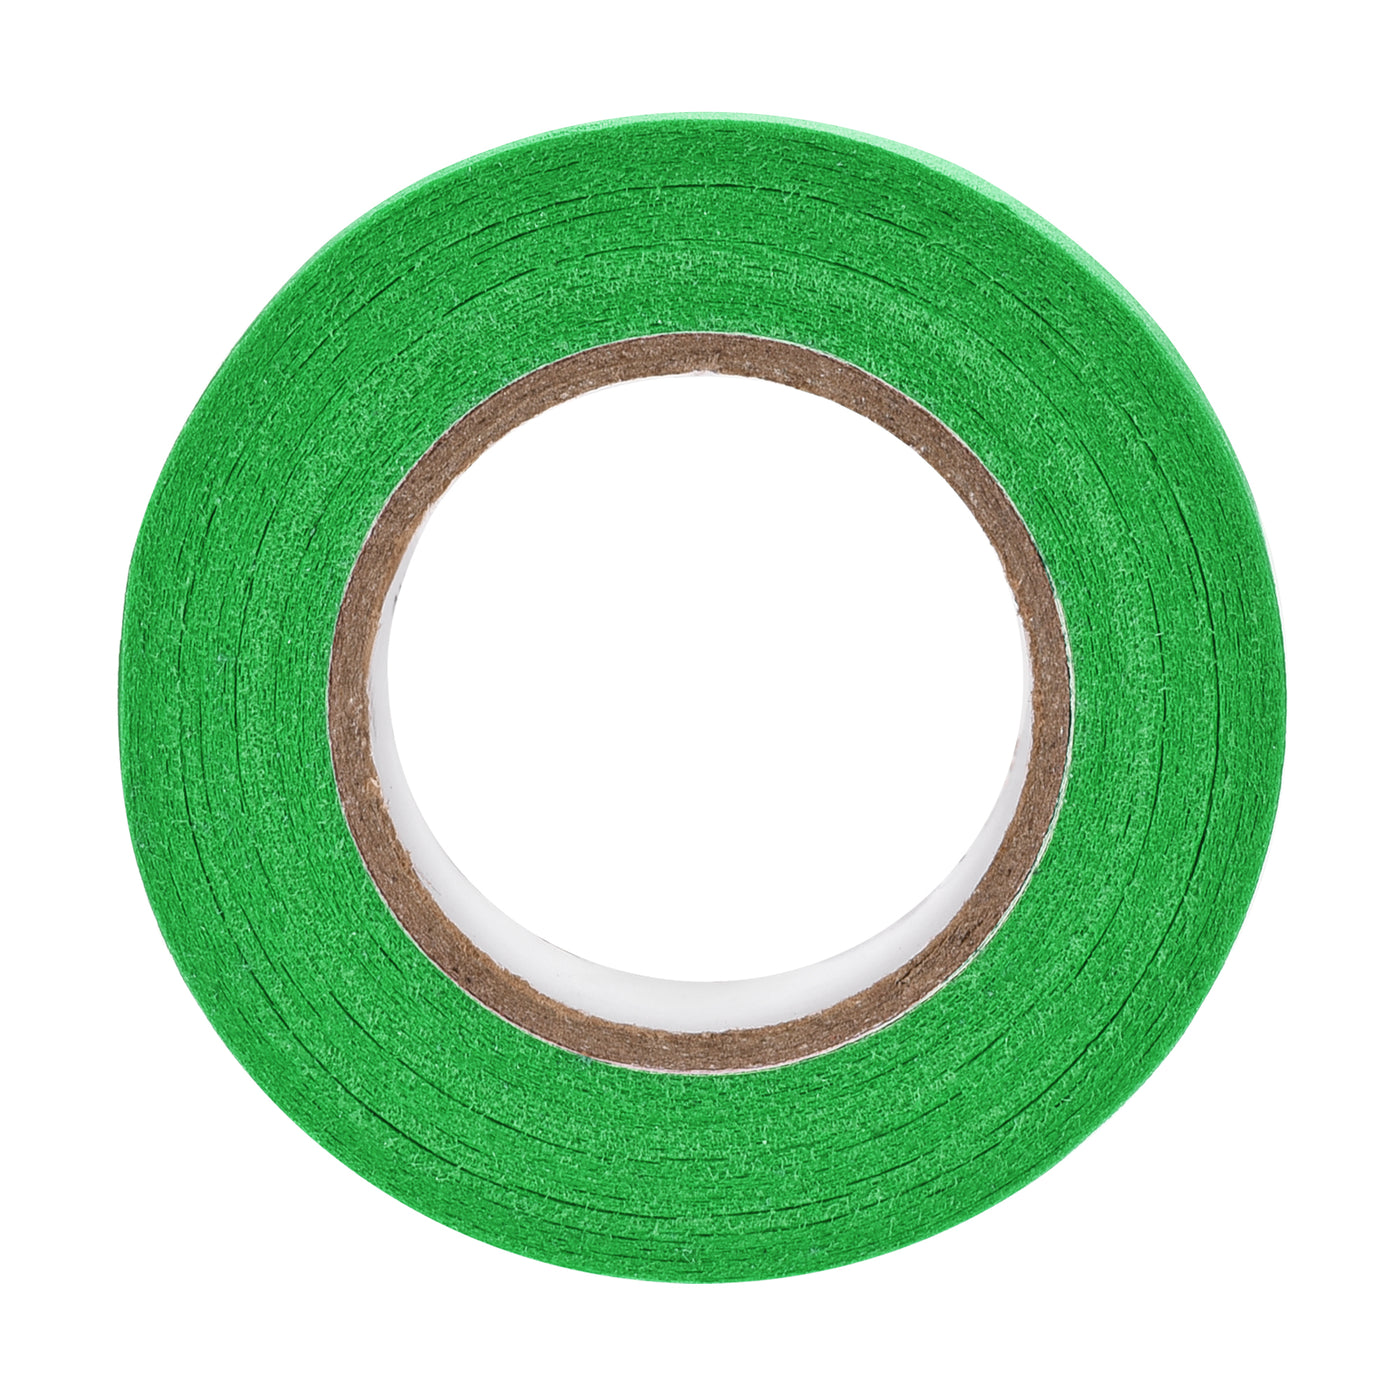 uxcell Uxcell 3Pcs 10mm 0.4 inch Wide 20m 21 Yards Masking Tape Painters Tape Rolls Dark Green